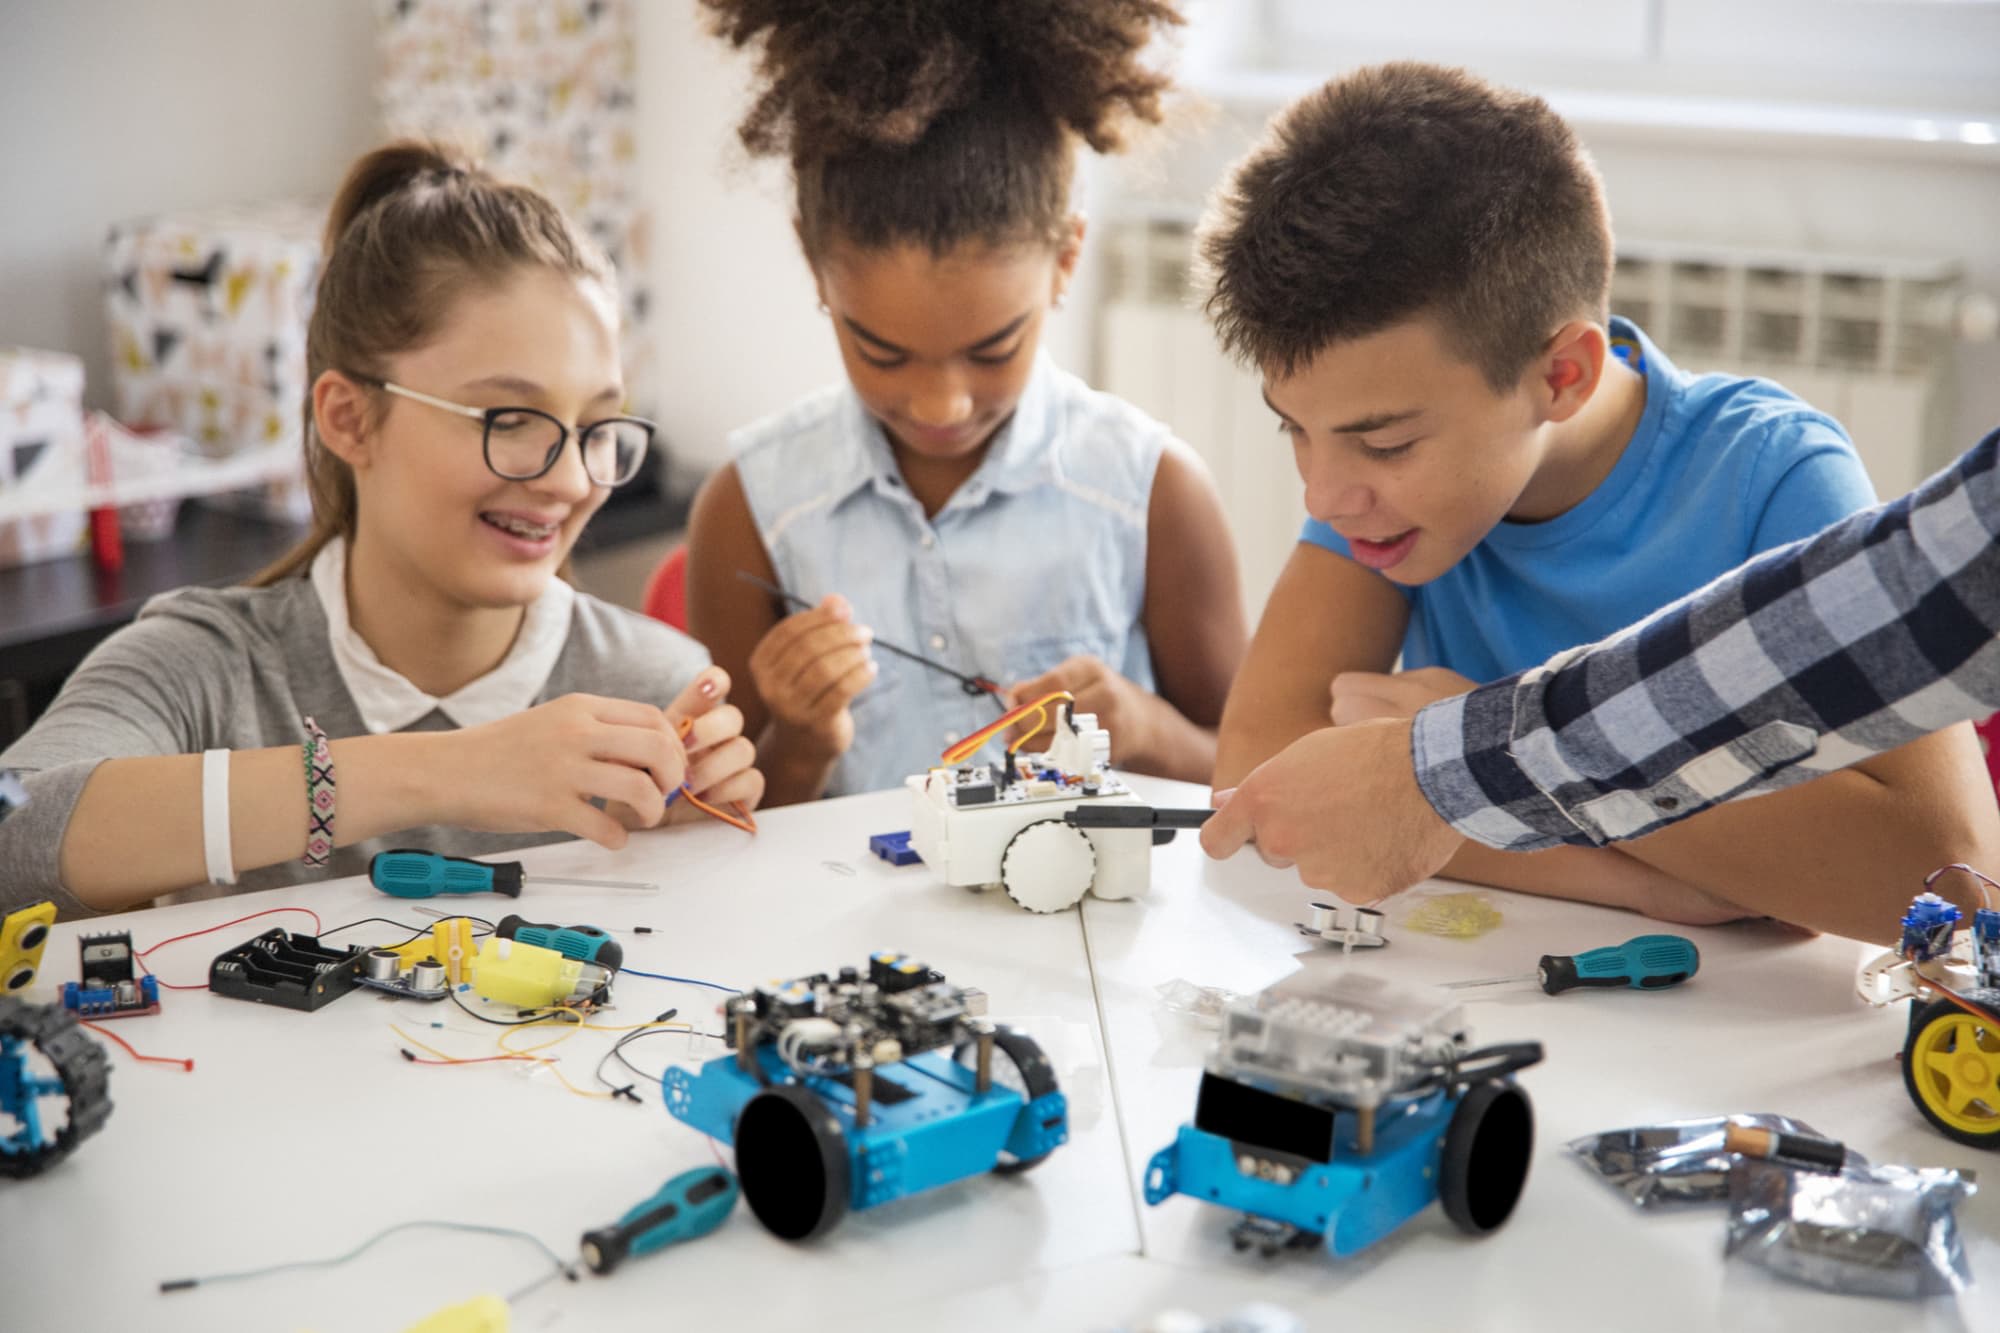 https://res.cloudinary.com/highereducation/images/f_auto,q_auto/v1662988041/ComputerScience.org/Kids-happy-building-robot-cars/Kids-happy-building-robot-cars.jpg?_i=AA